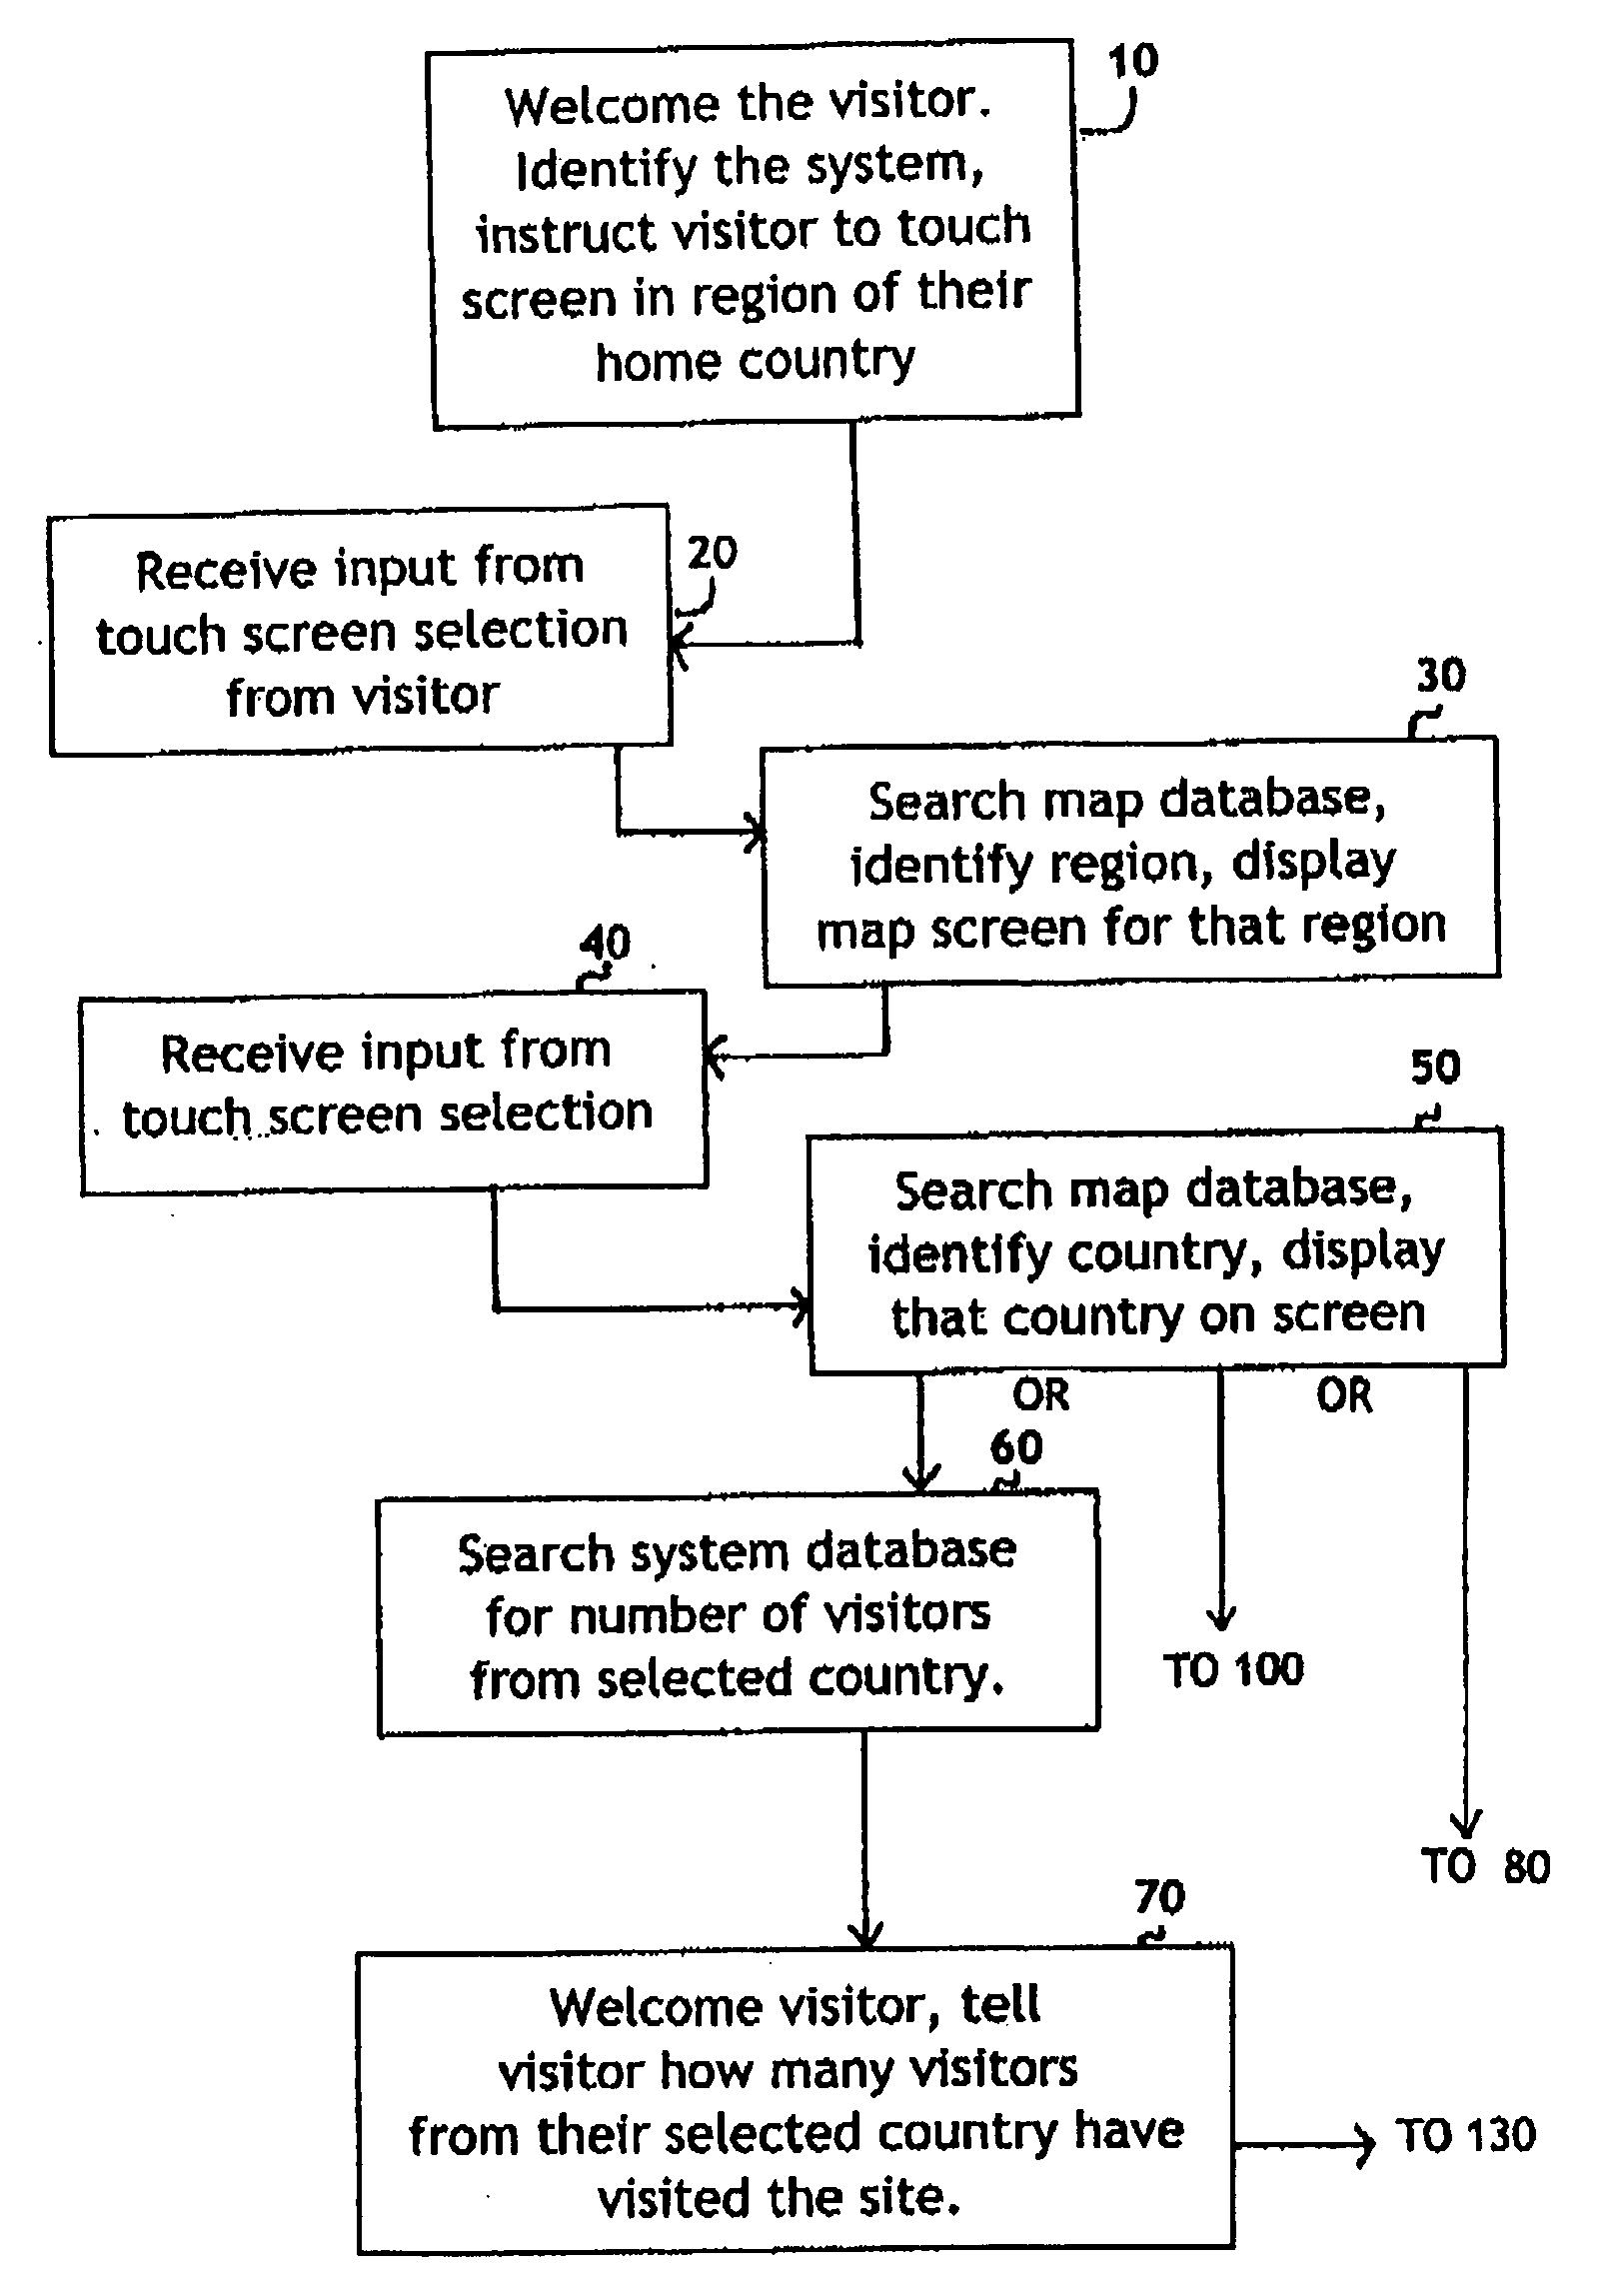 System for self-registering visitor information with geographic specificity and searchable fields